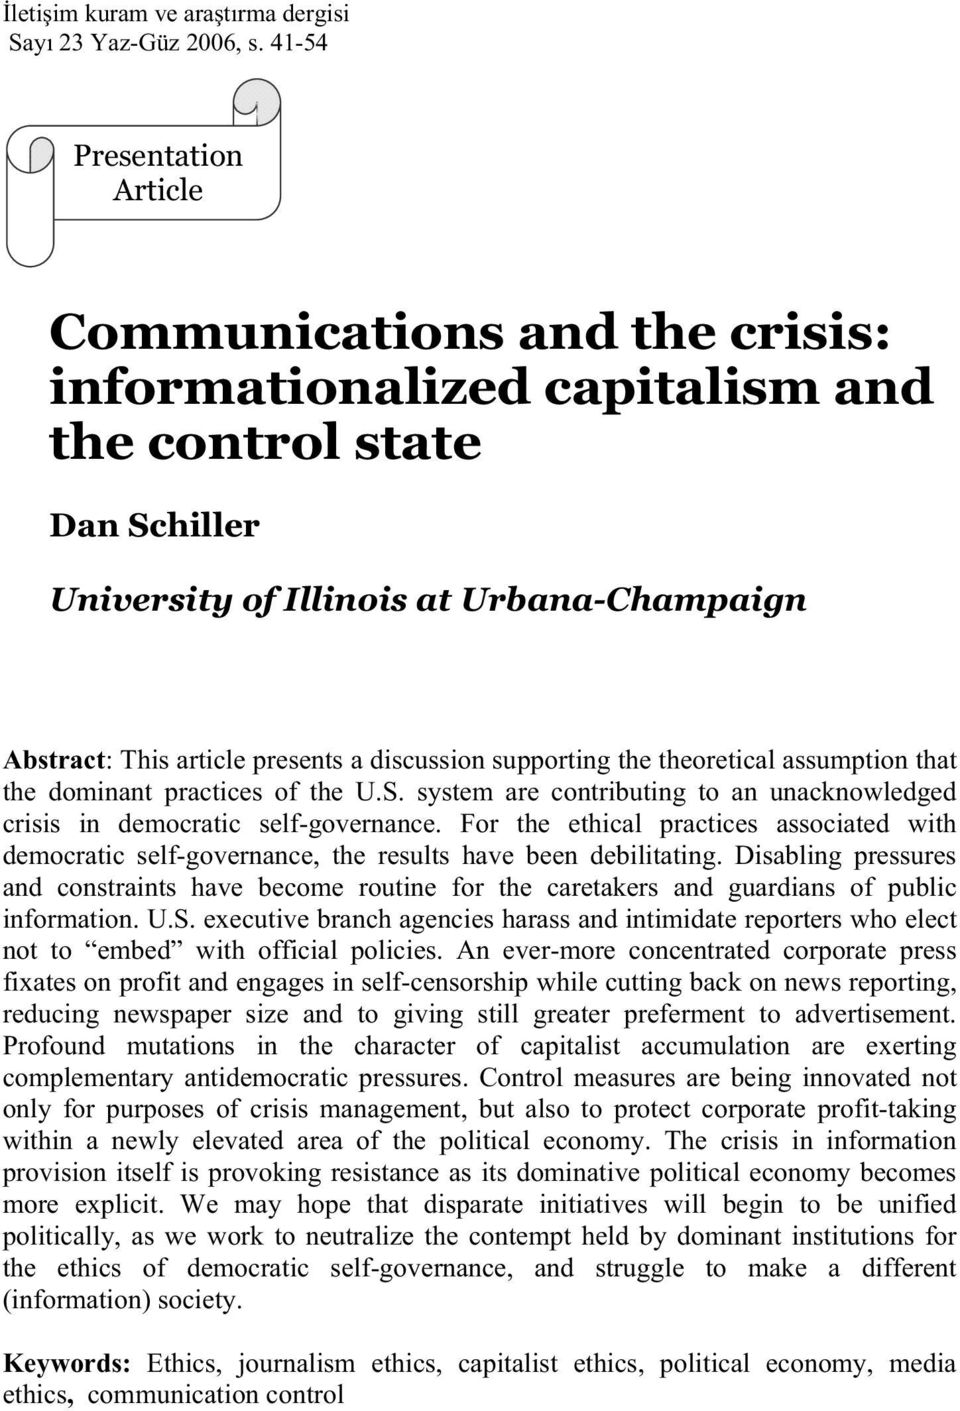 discussion supporting the theoretical assumption that the dominant practices of the U.S. system are contributing to an unacknowledged crisis in democratic self-governance.